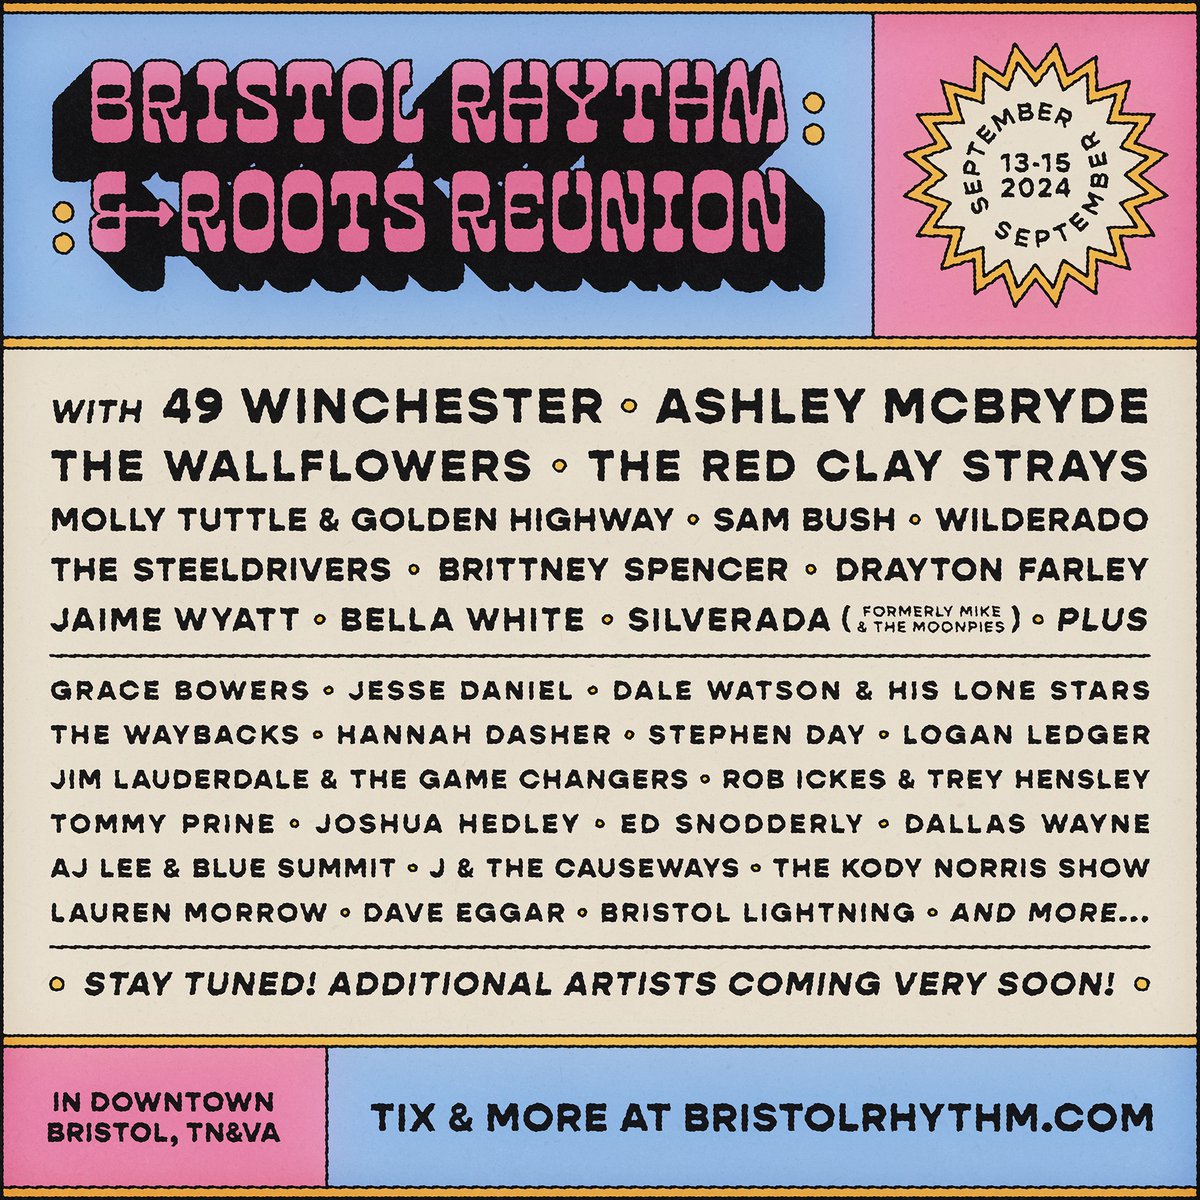 JUST DROPPED! Your #BristolRhythm initial lineup is HERE 🤠✨ 🎸@49winchester, @AshleyMcBryde, @TheWallflowers, @RedClayStrays + MANY MORE are set to play the fest September 13-15 in historic downtown Bristol TN-VA!! 🎟️Secure your tickets now at BristolRhythm.com